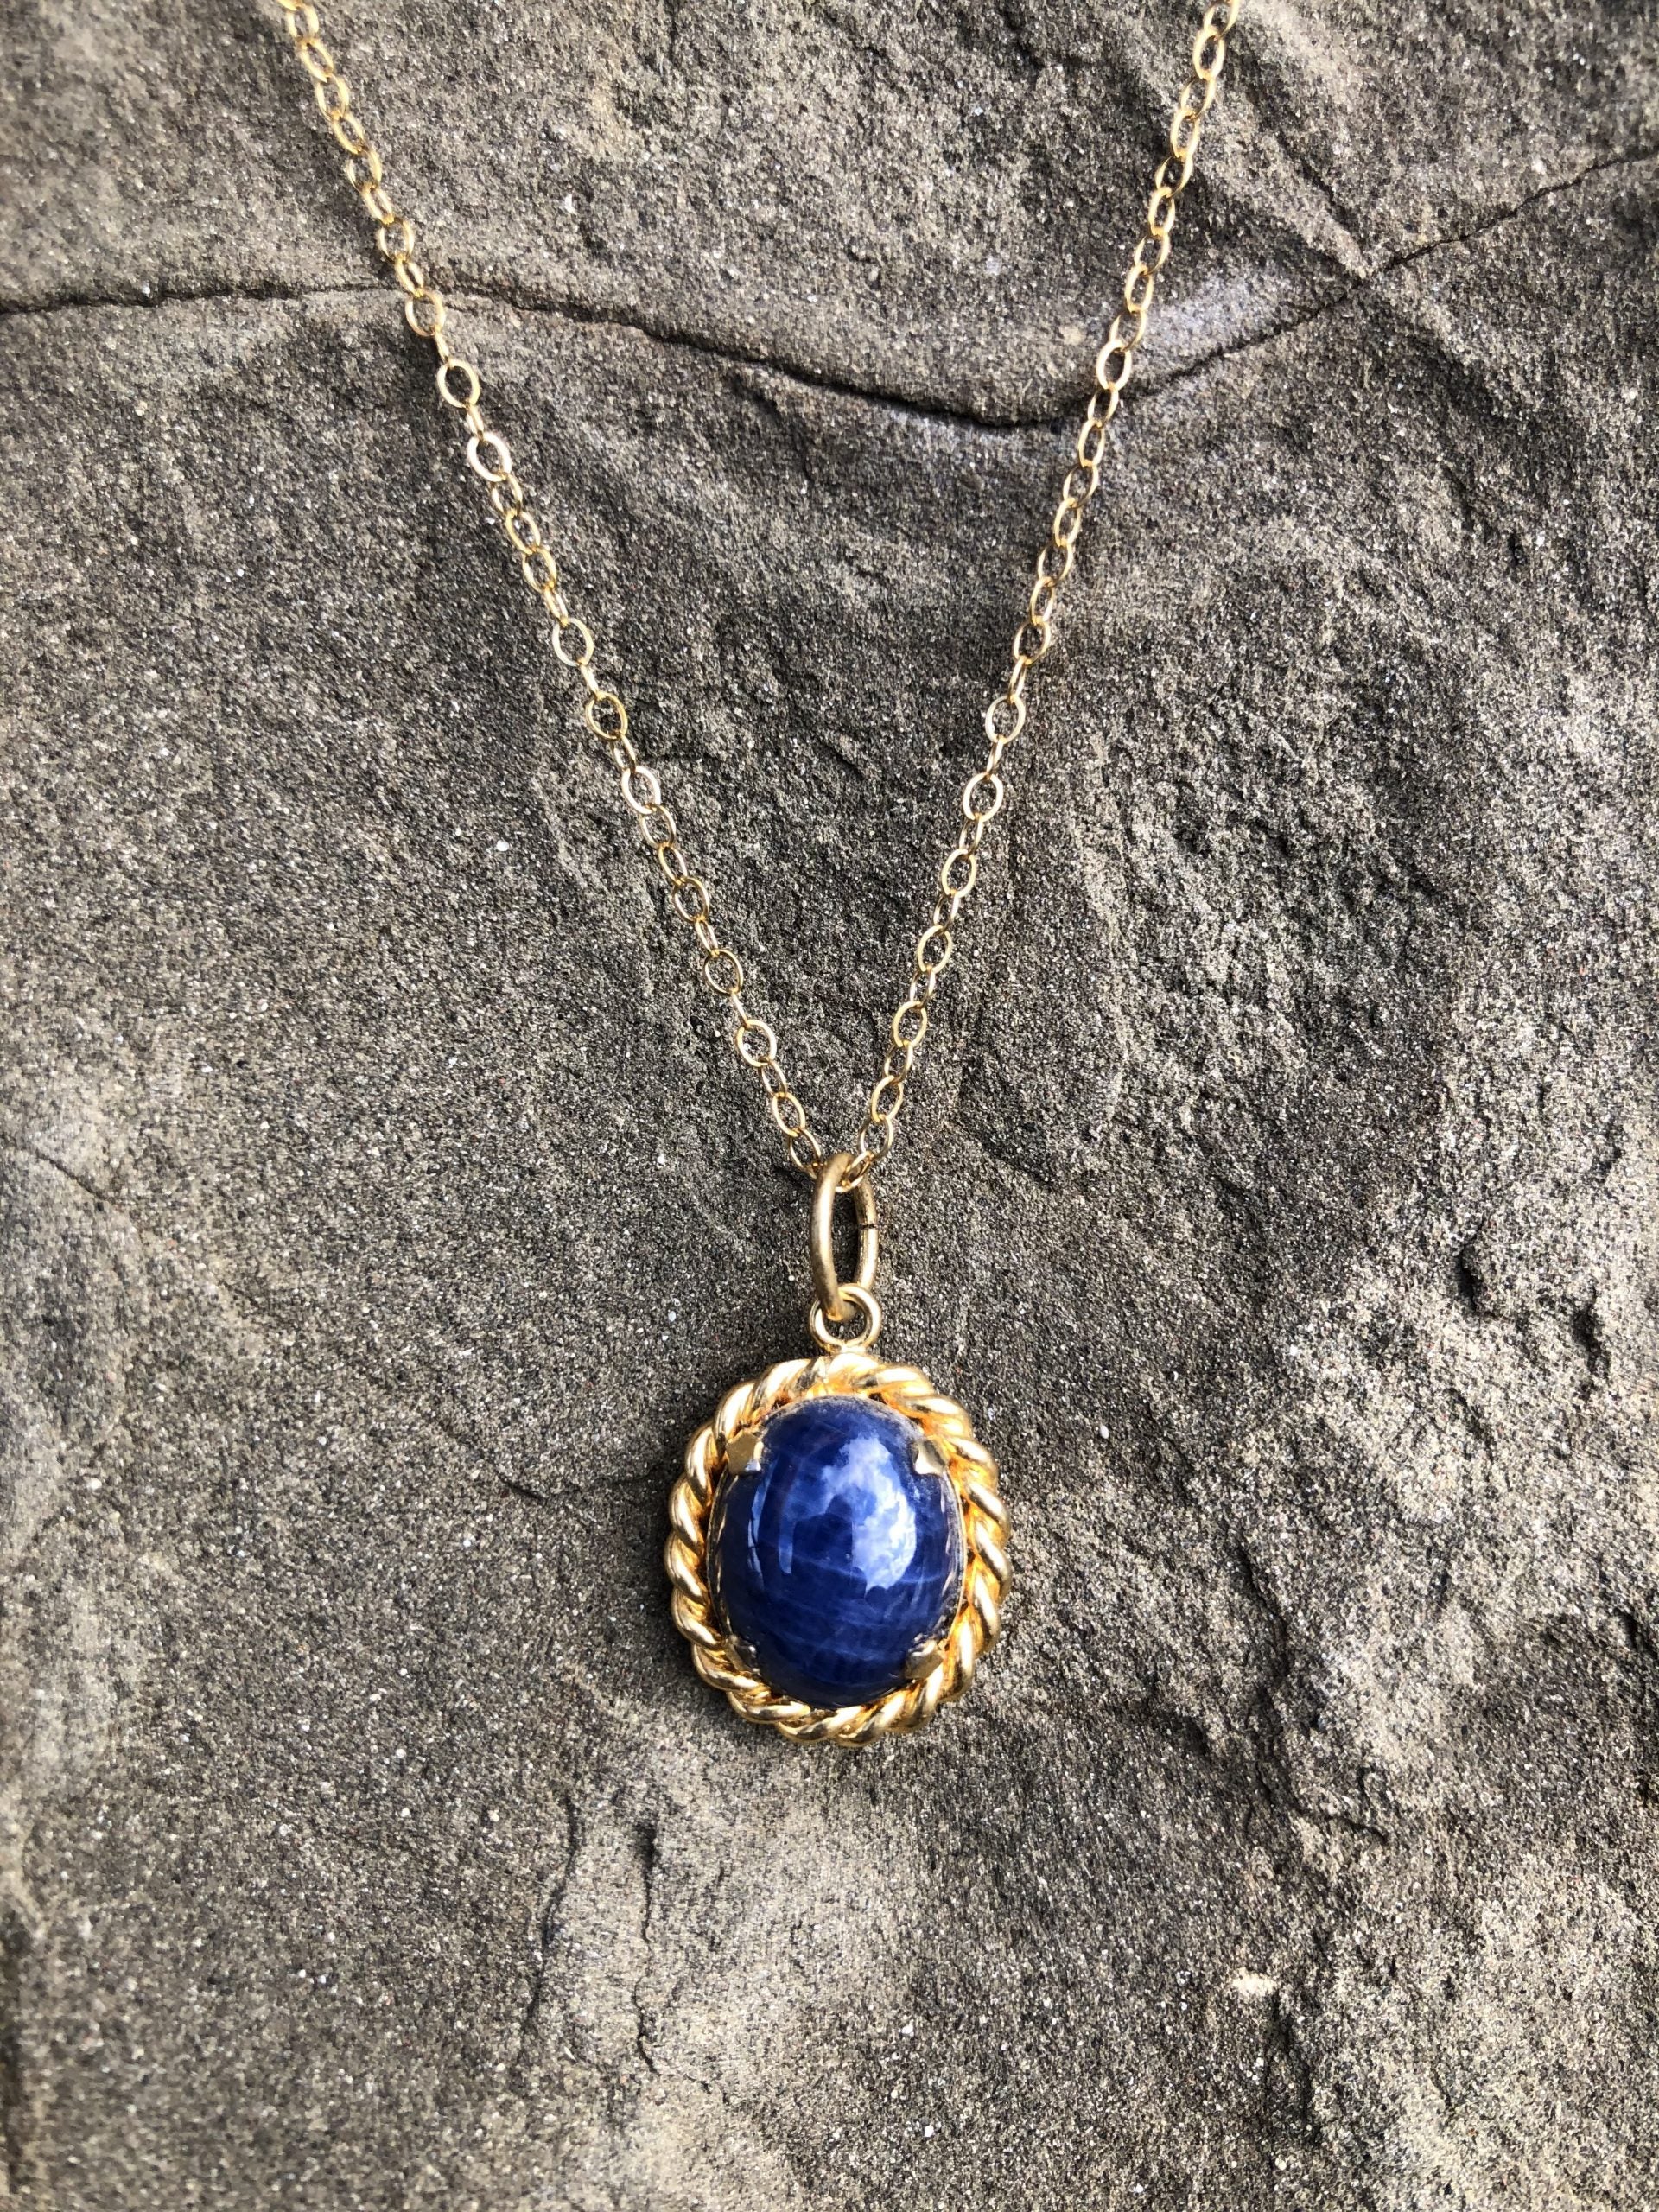 Necklace with a rich blue sapphire, hand polished to a 12x9mm cabochon and set in 14 carat gold filled setting with an 18 inch, 14 carat gold filled chain, front